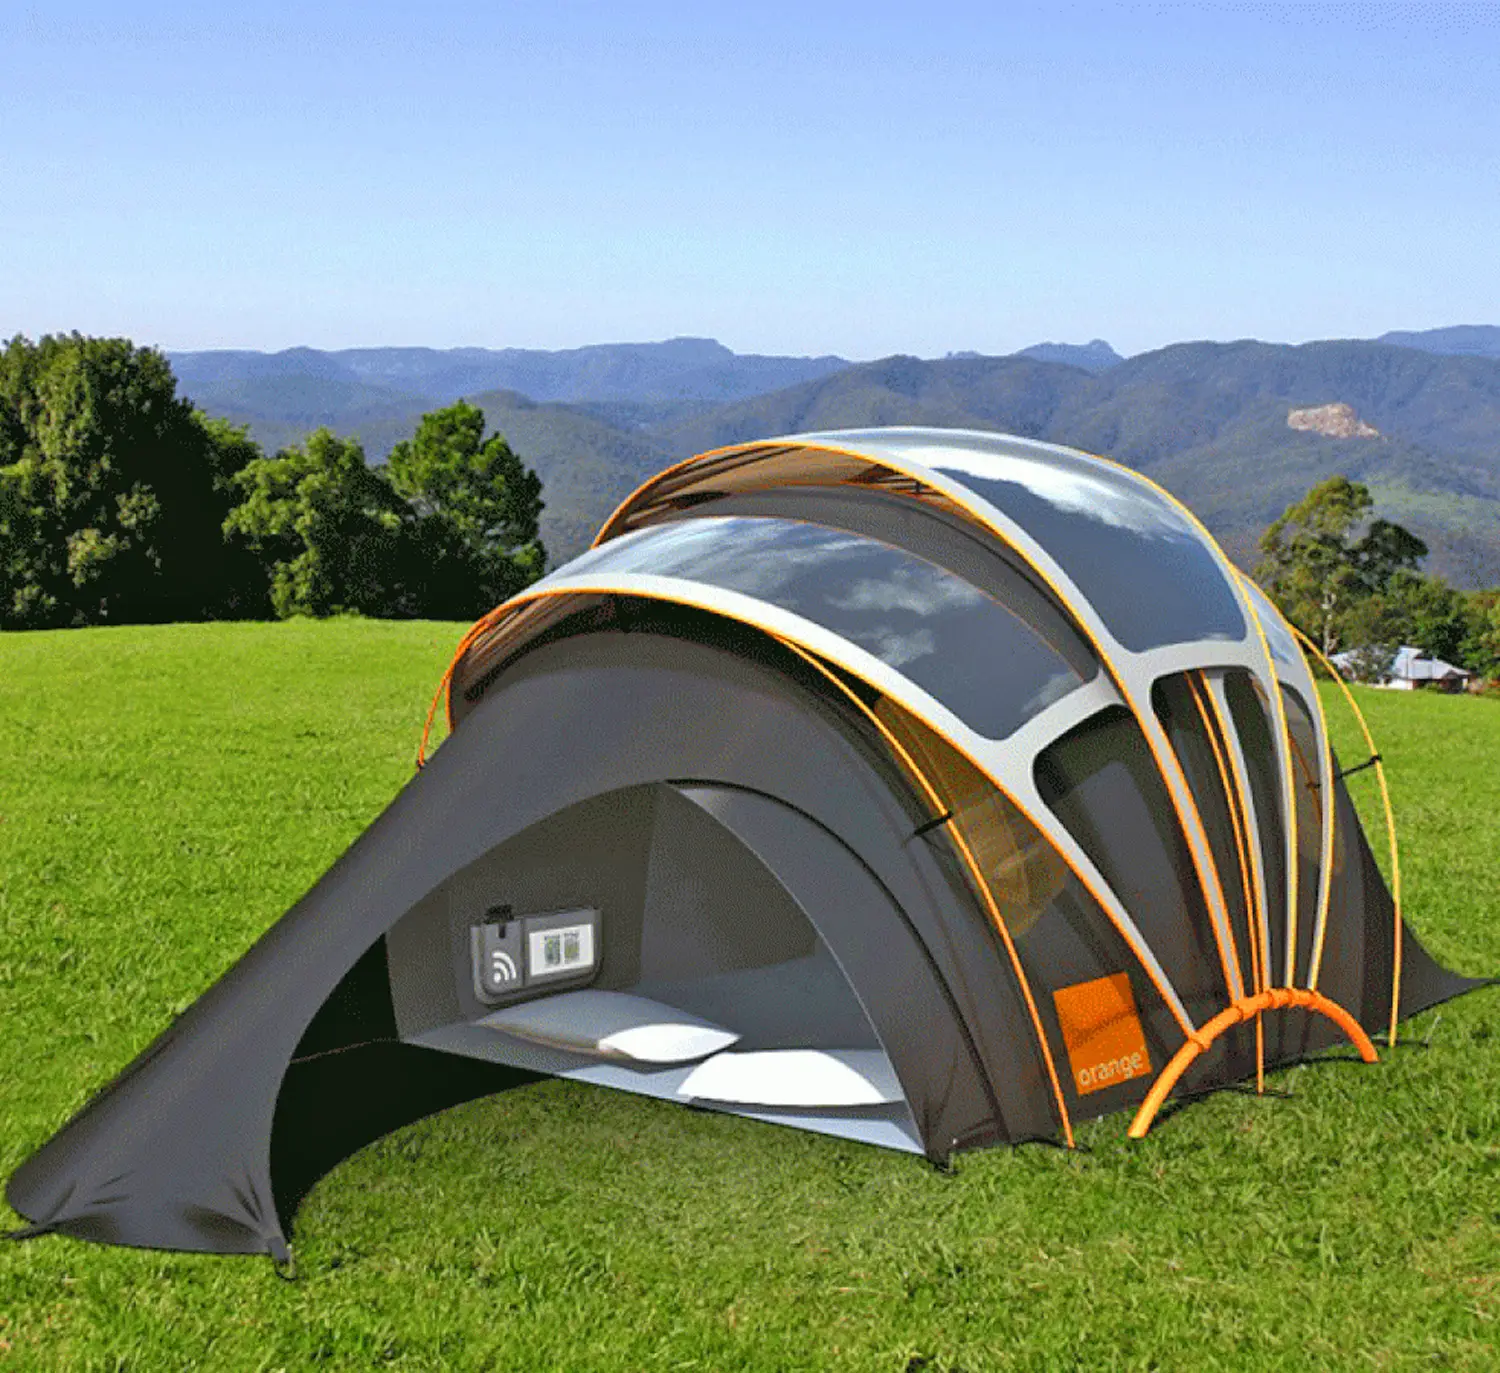 This Solar Tent Has Heated Floors, Wi